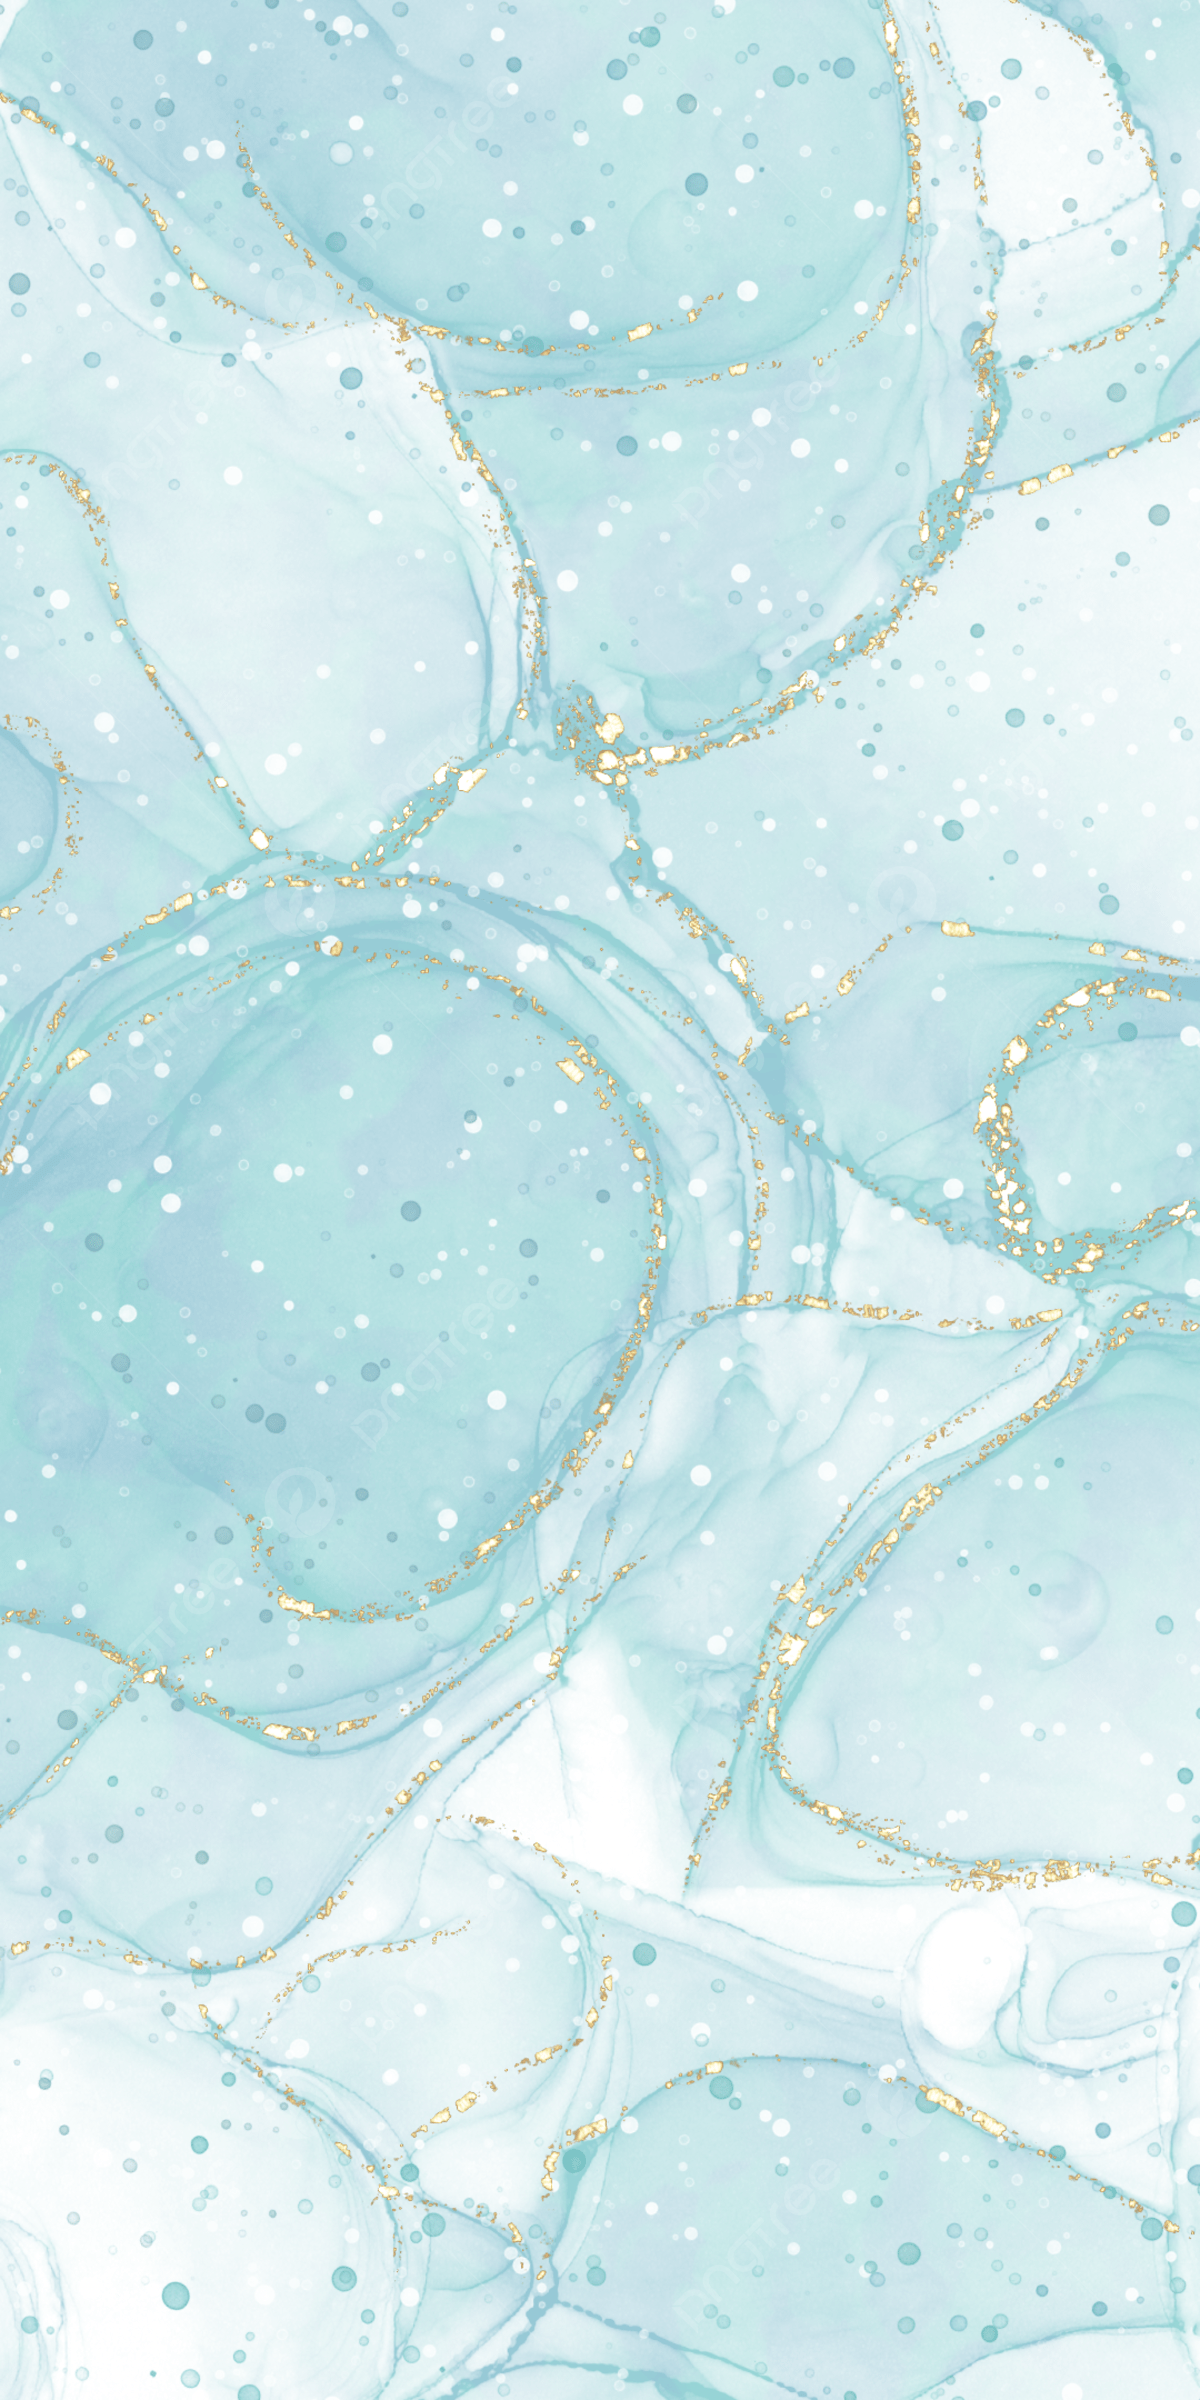 A blue painting with gold details - Turquoise, marble